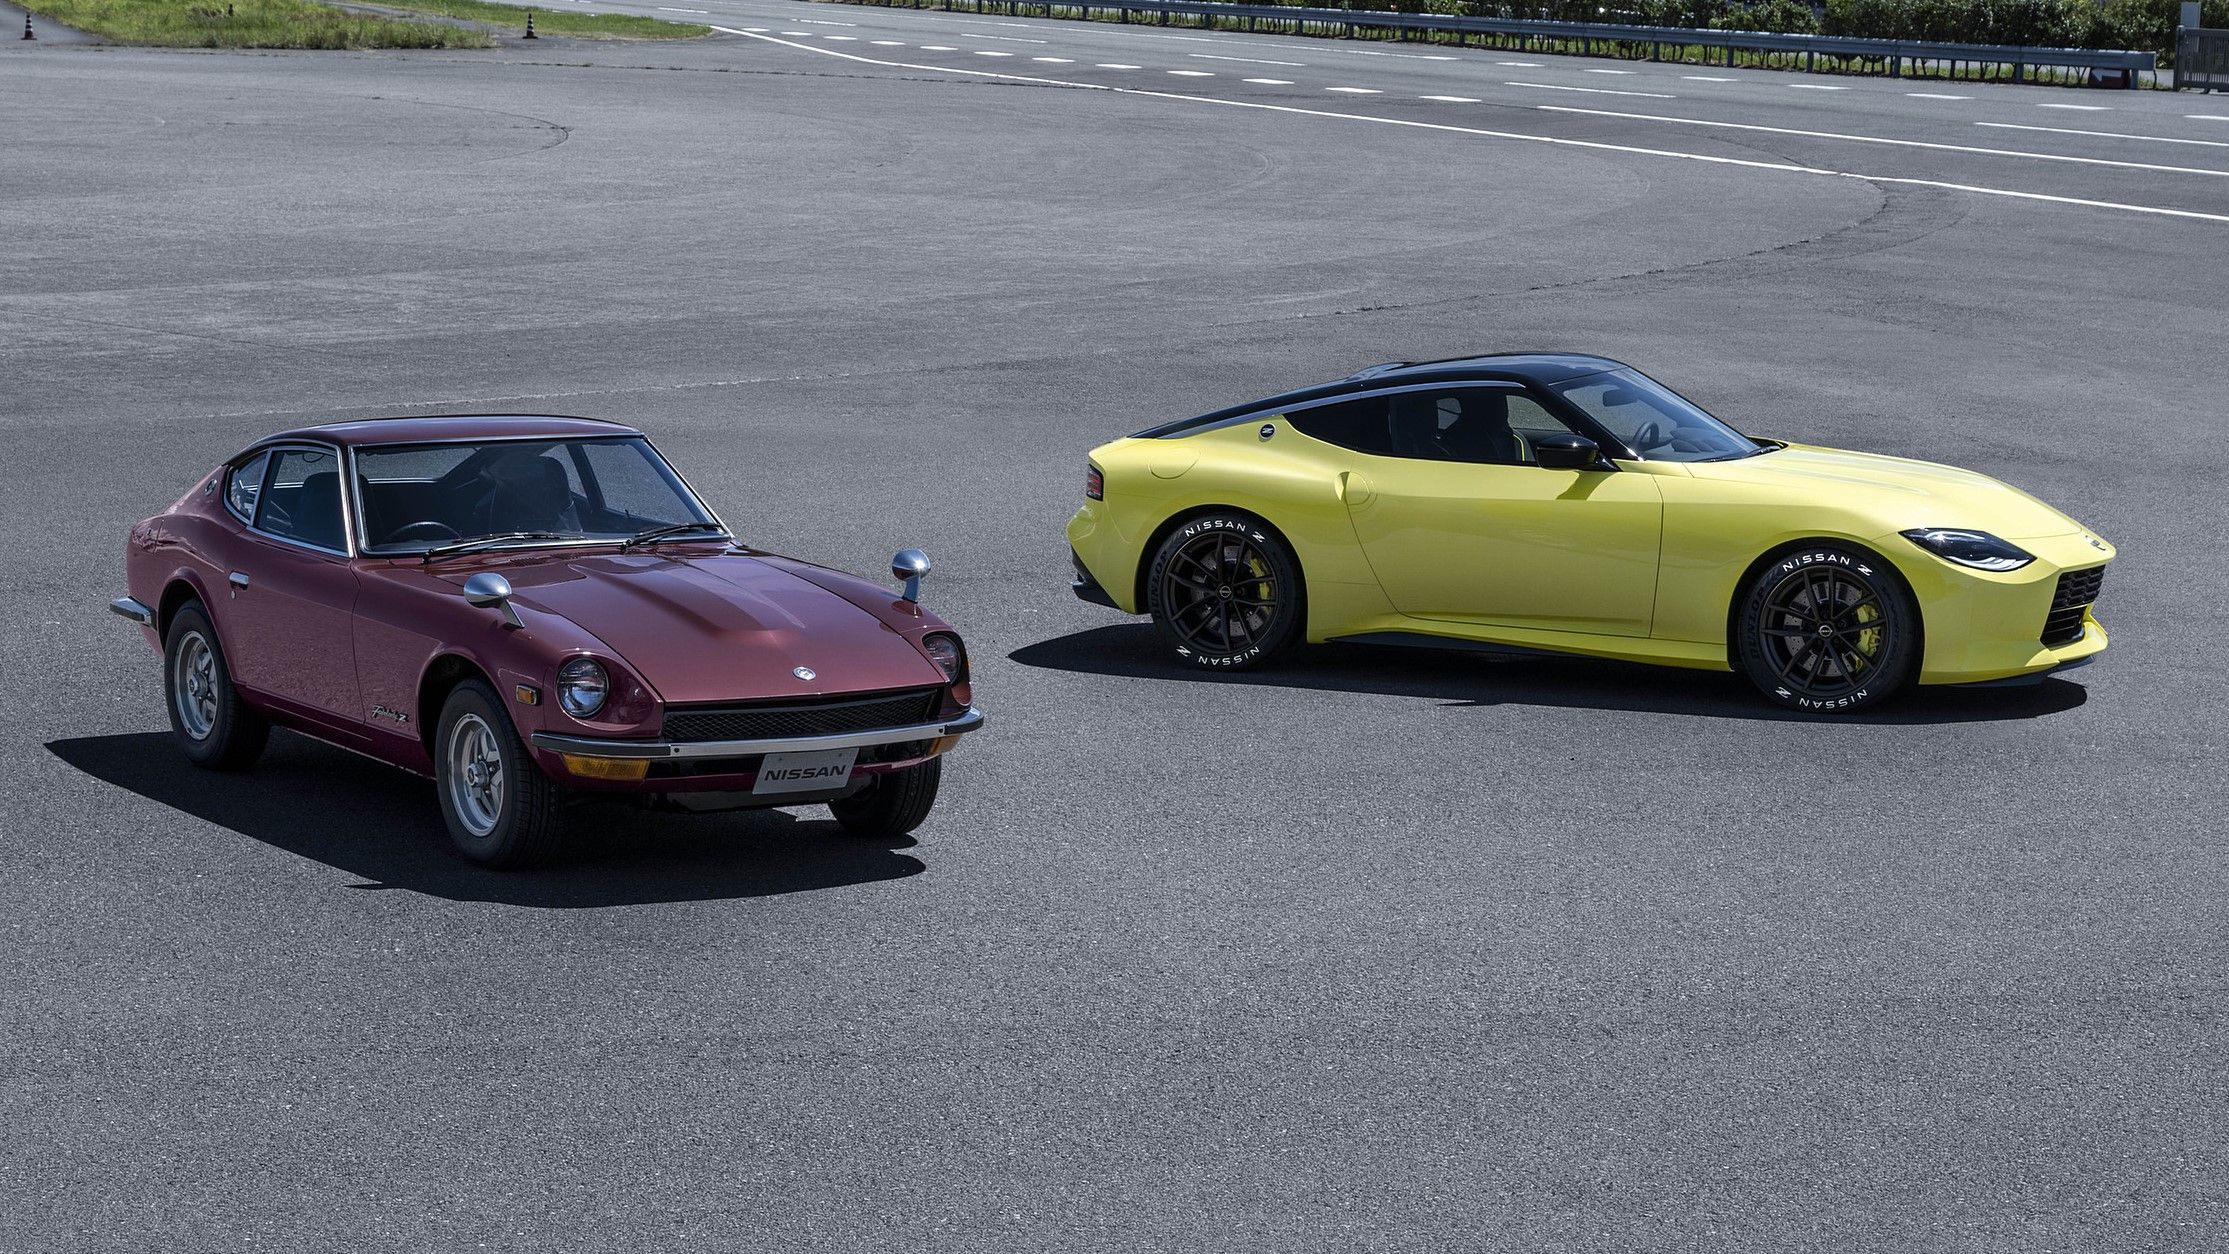 nissan fairlady z and nissan 400z groupie front view